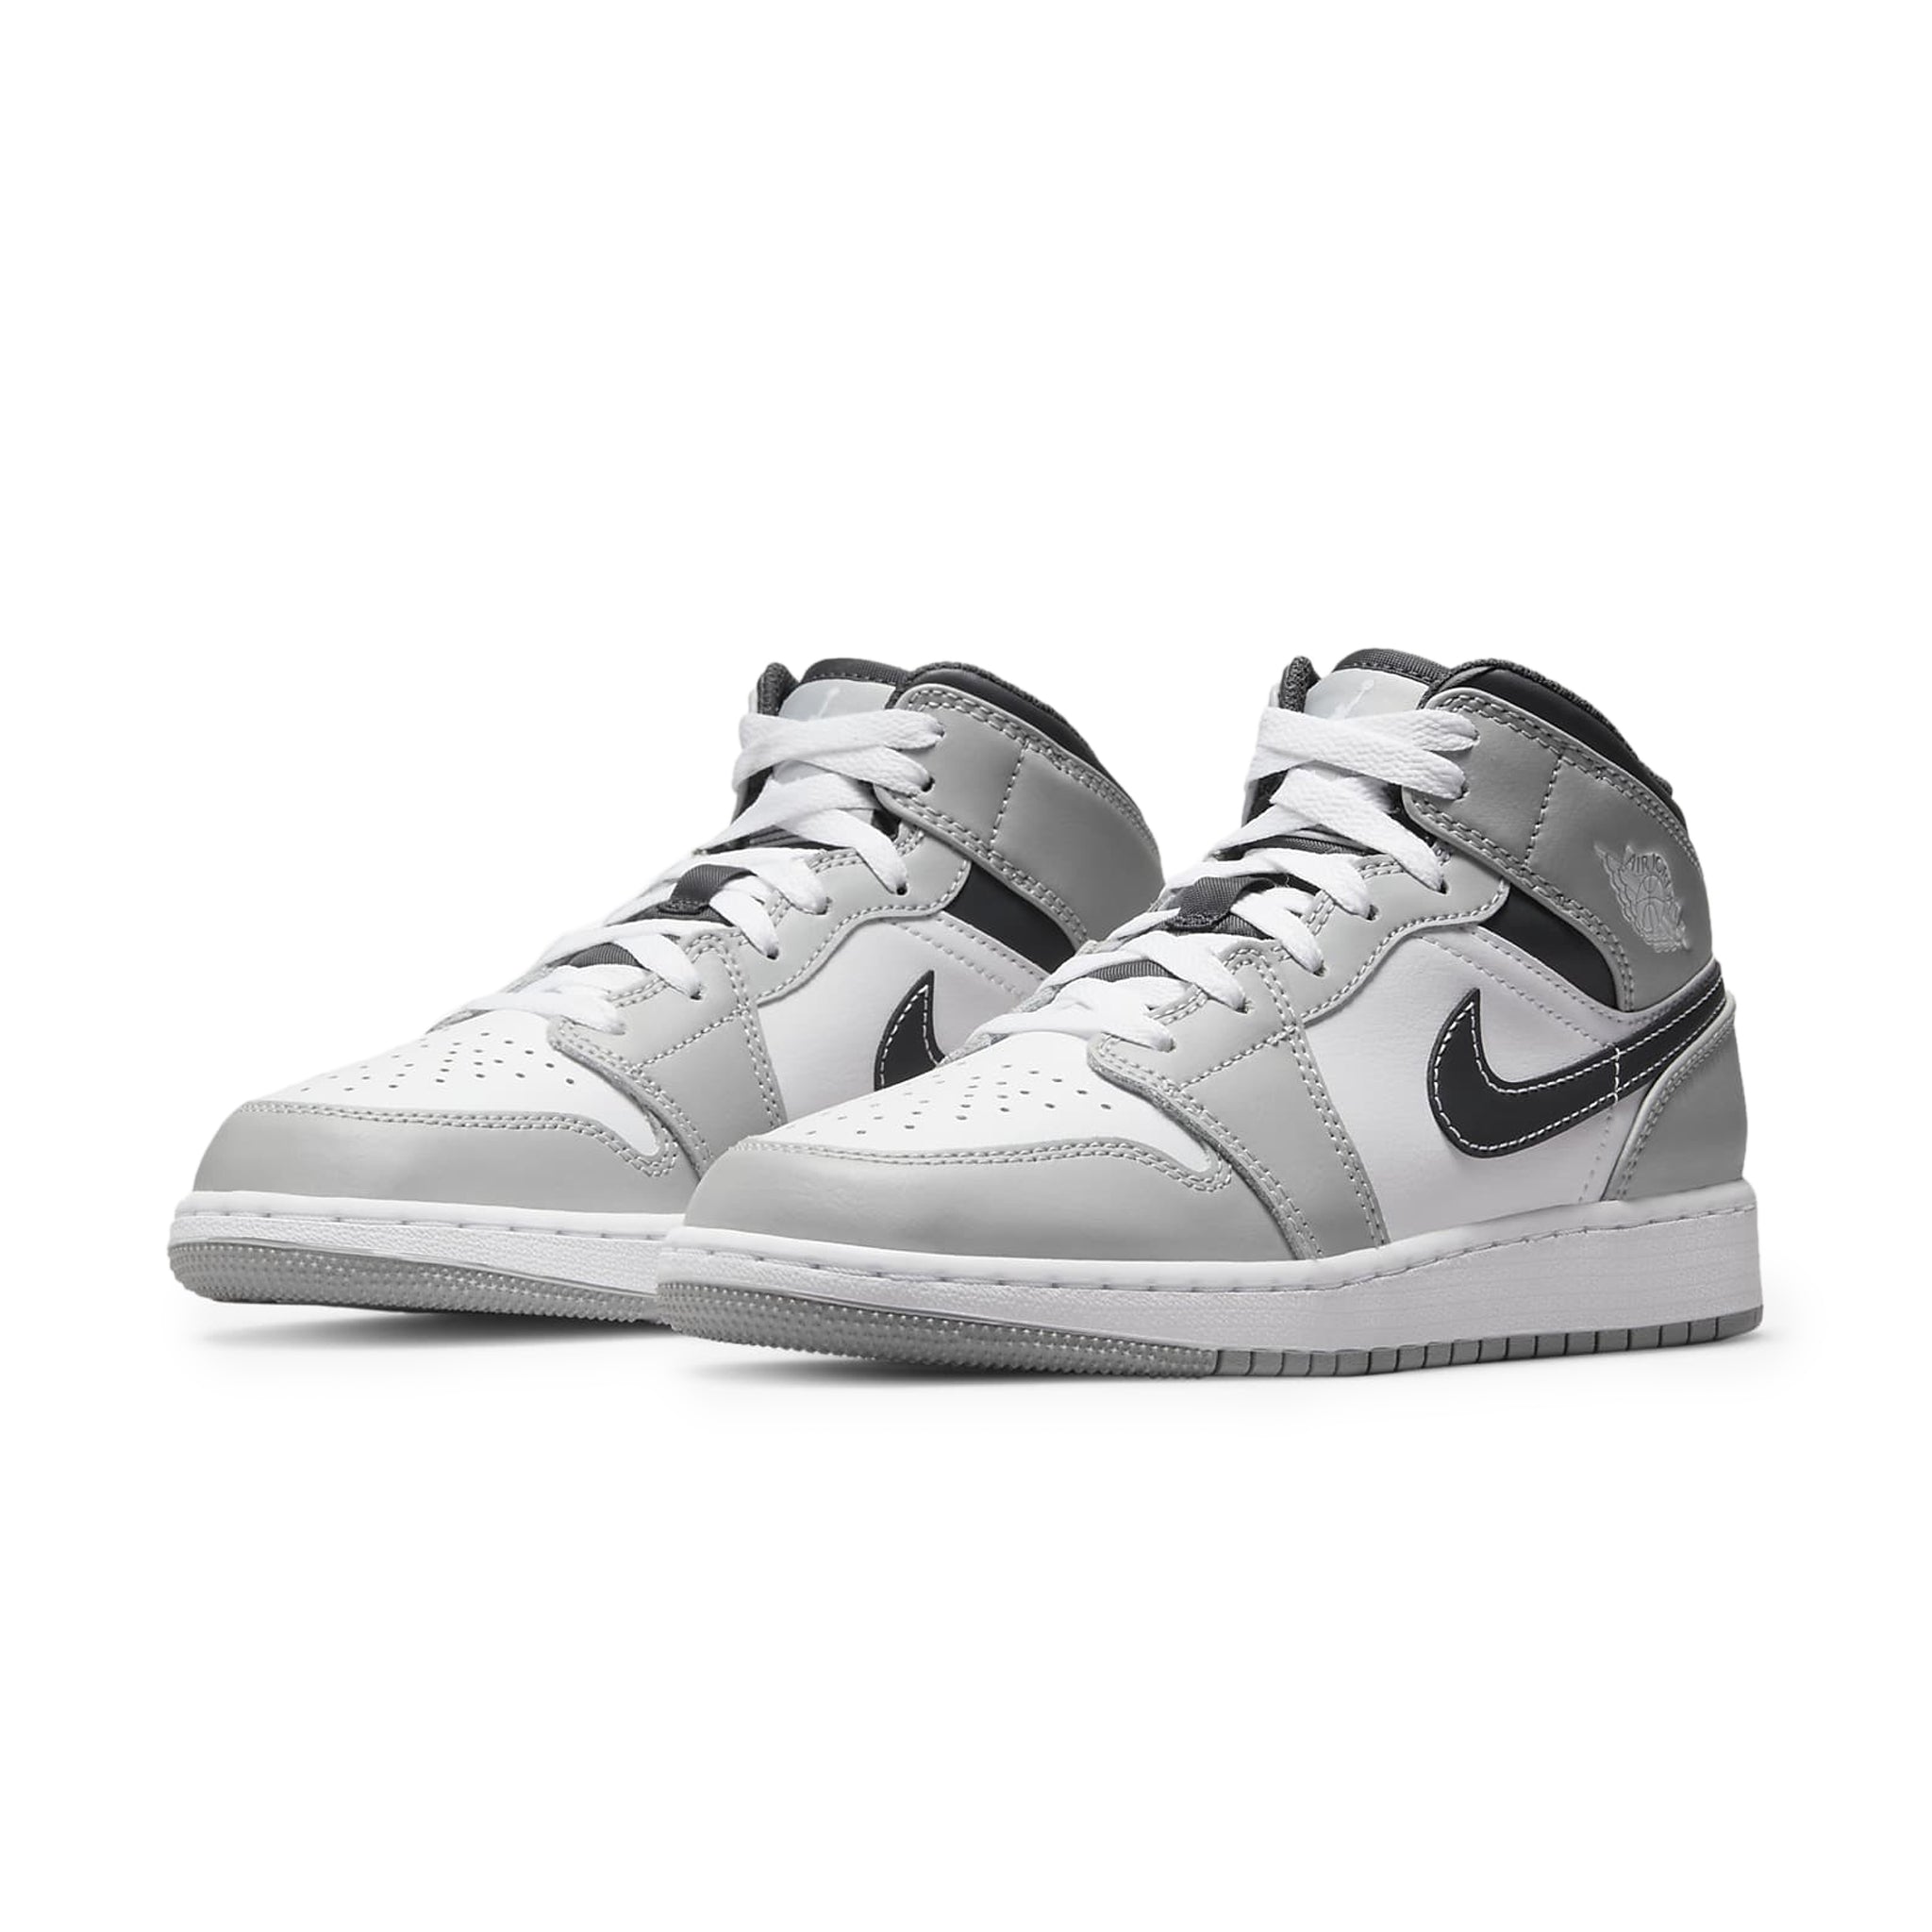 Front side view of Air Wmns Air into jordan 1 Mid 'Wolf Grey Aluminum' BQ6472 105 Light Smoke Grey Anthracite (GS) 554725-078